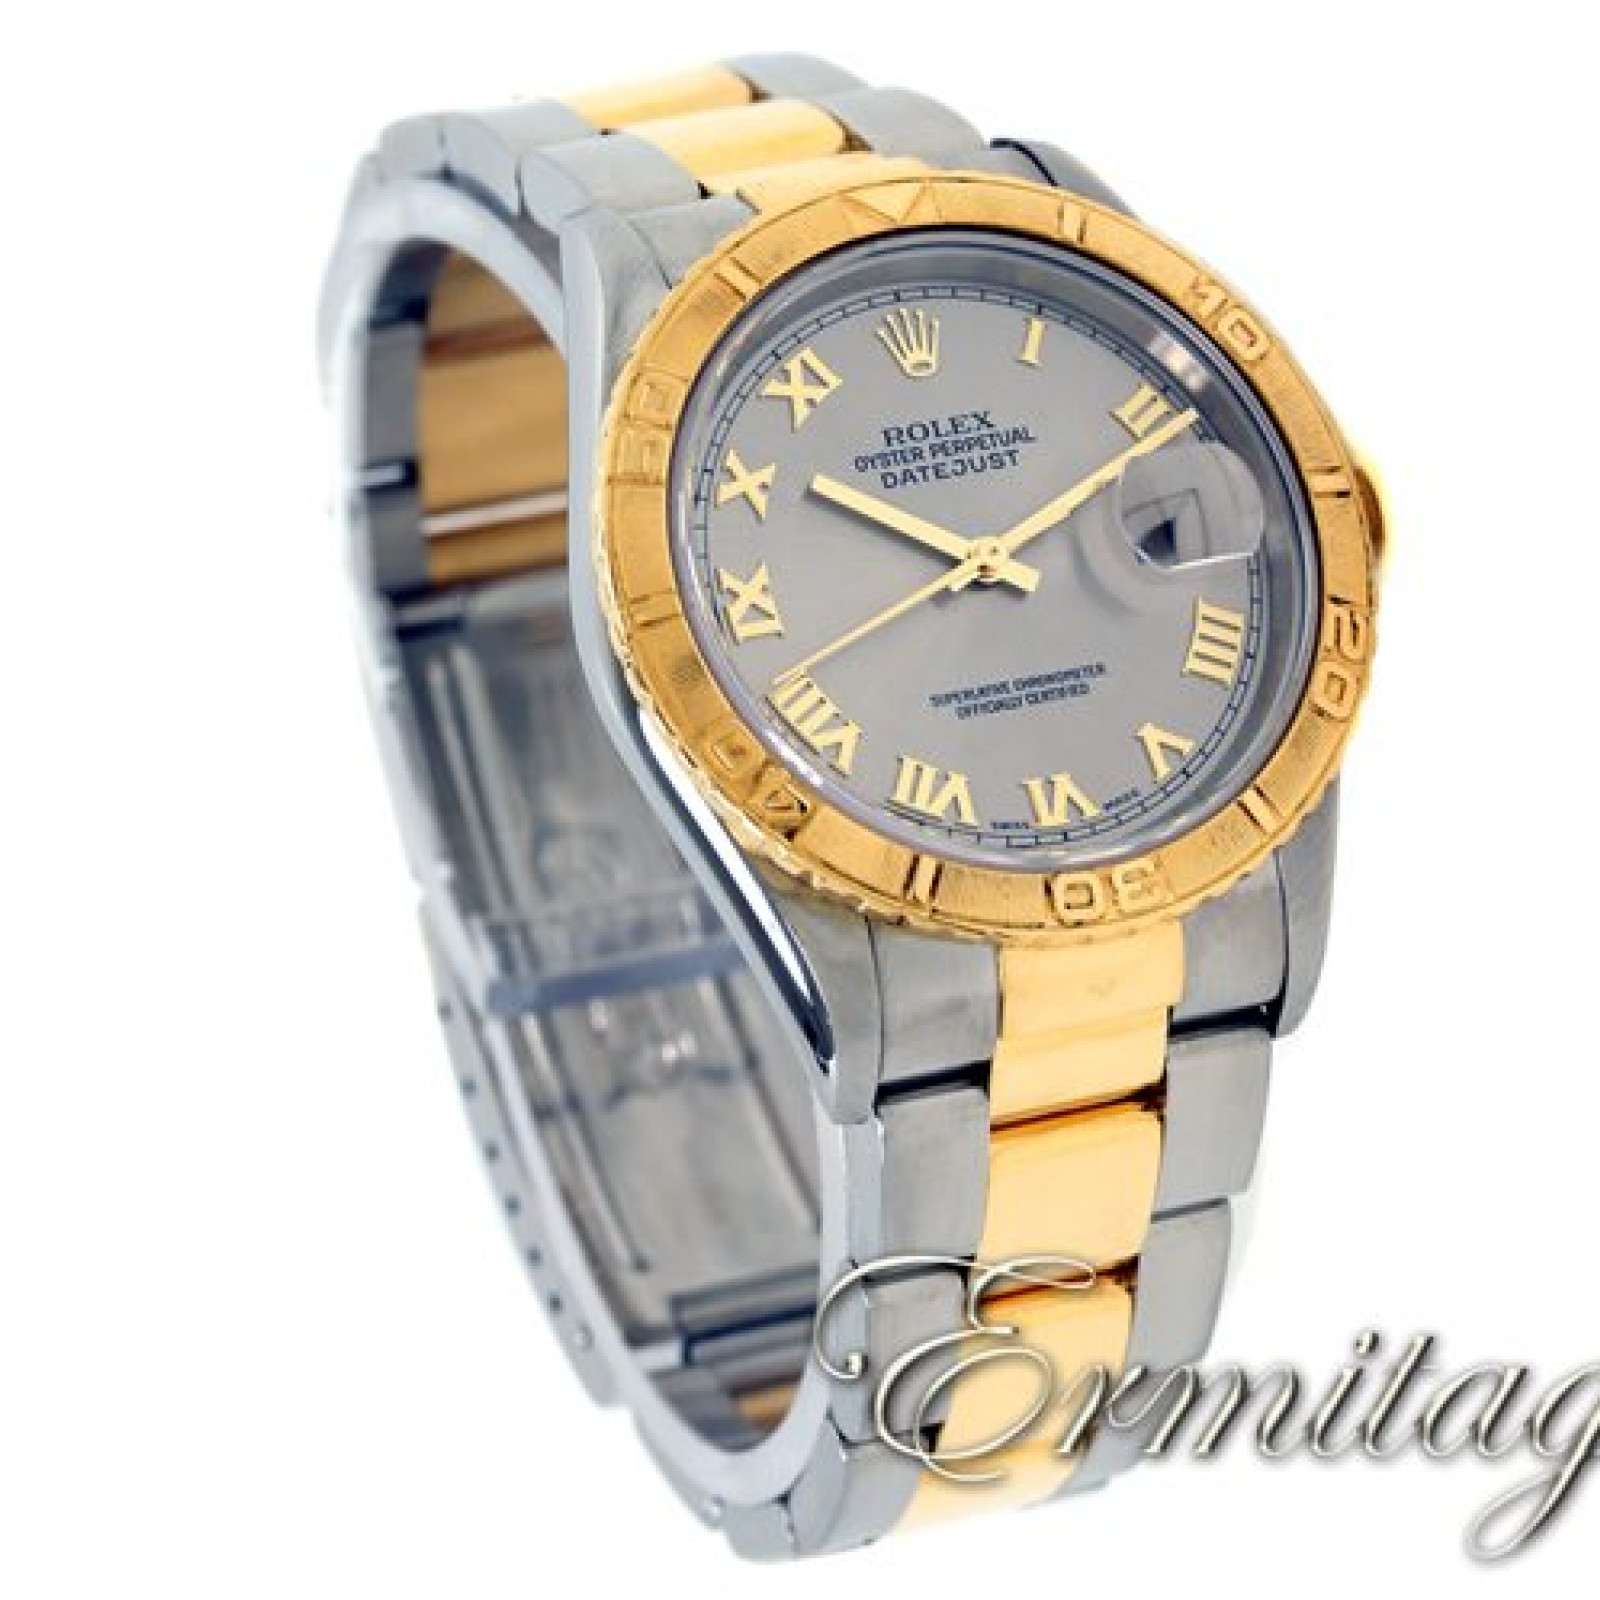 Pre-Owned Rolex Datejust Turn-O-Graph 16263 Gold & Steel